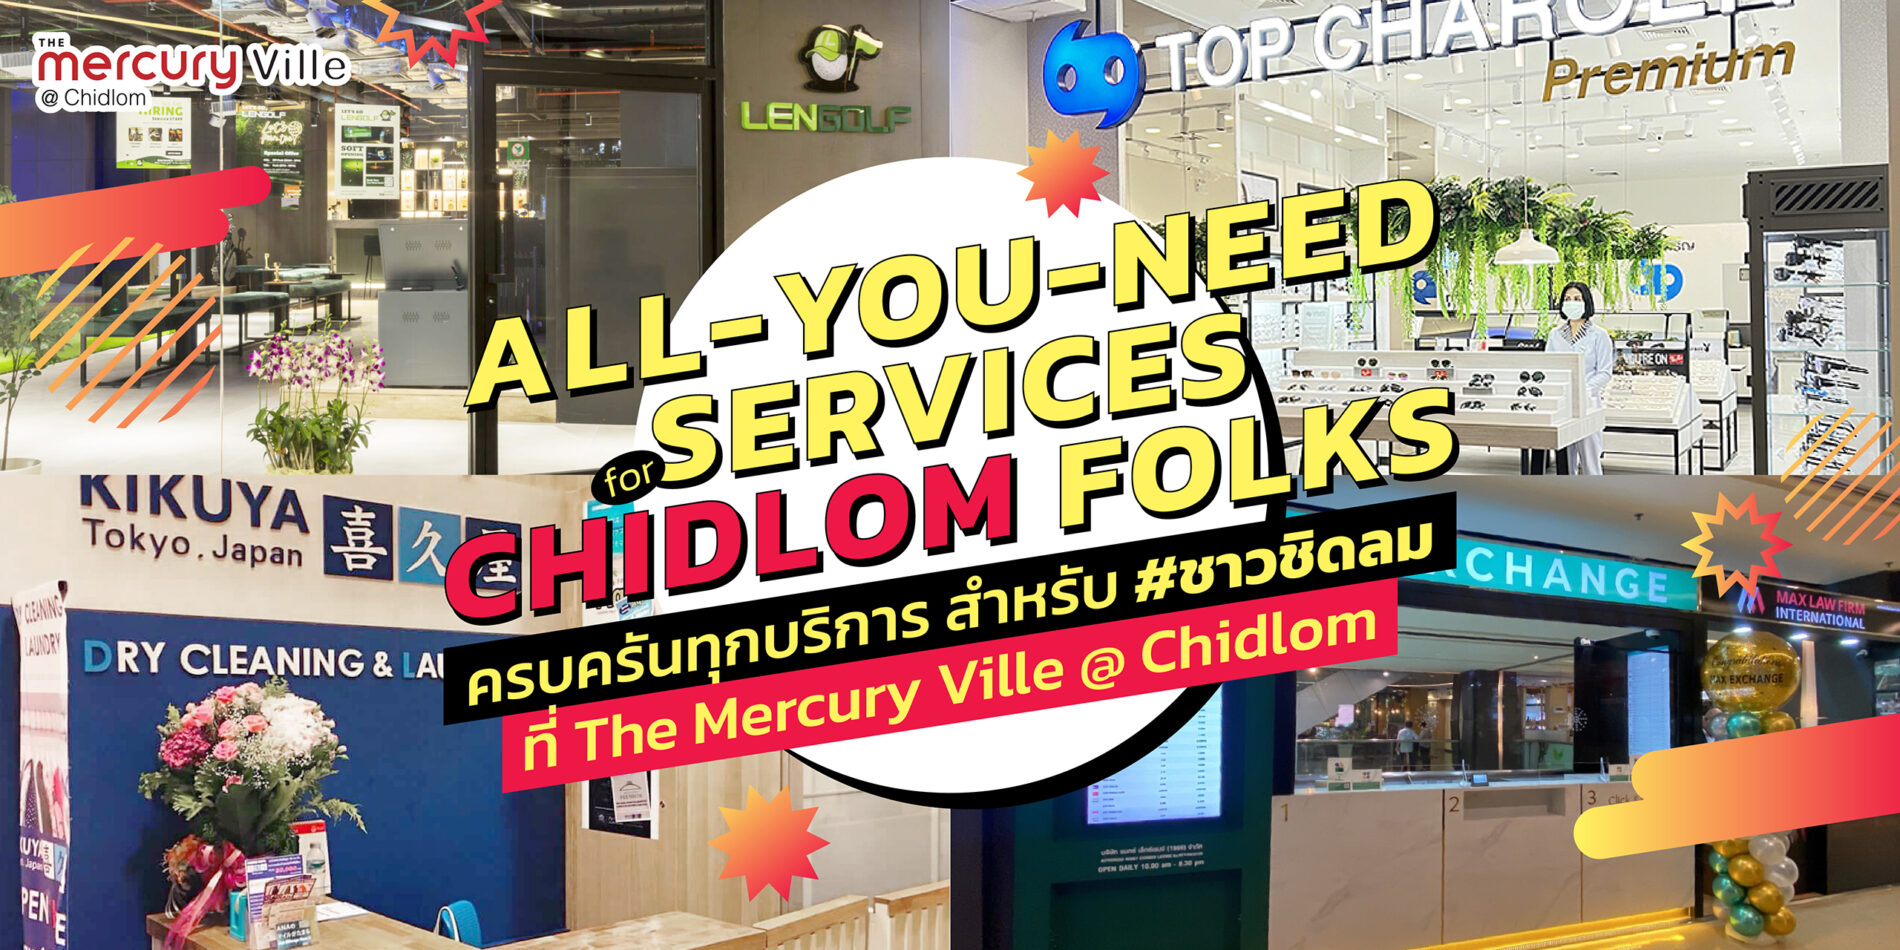 All-You-Need Services for Chidlom Folks at The Mercury Ville @ Chidlom